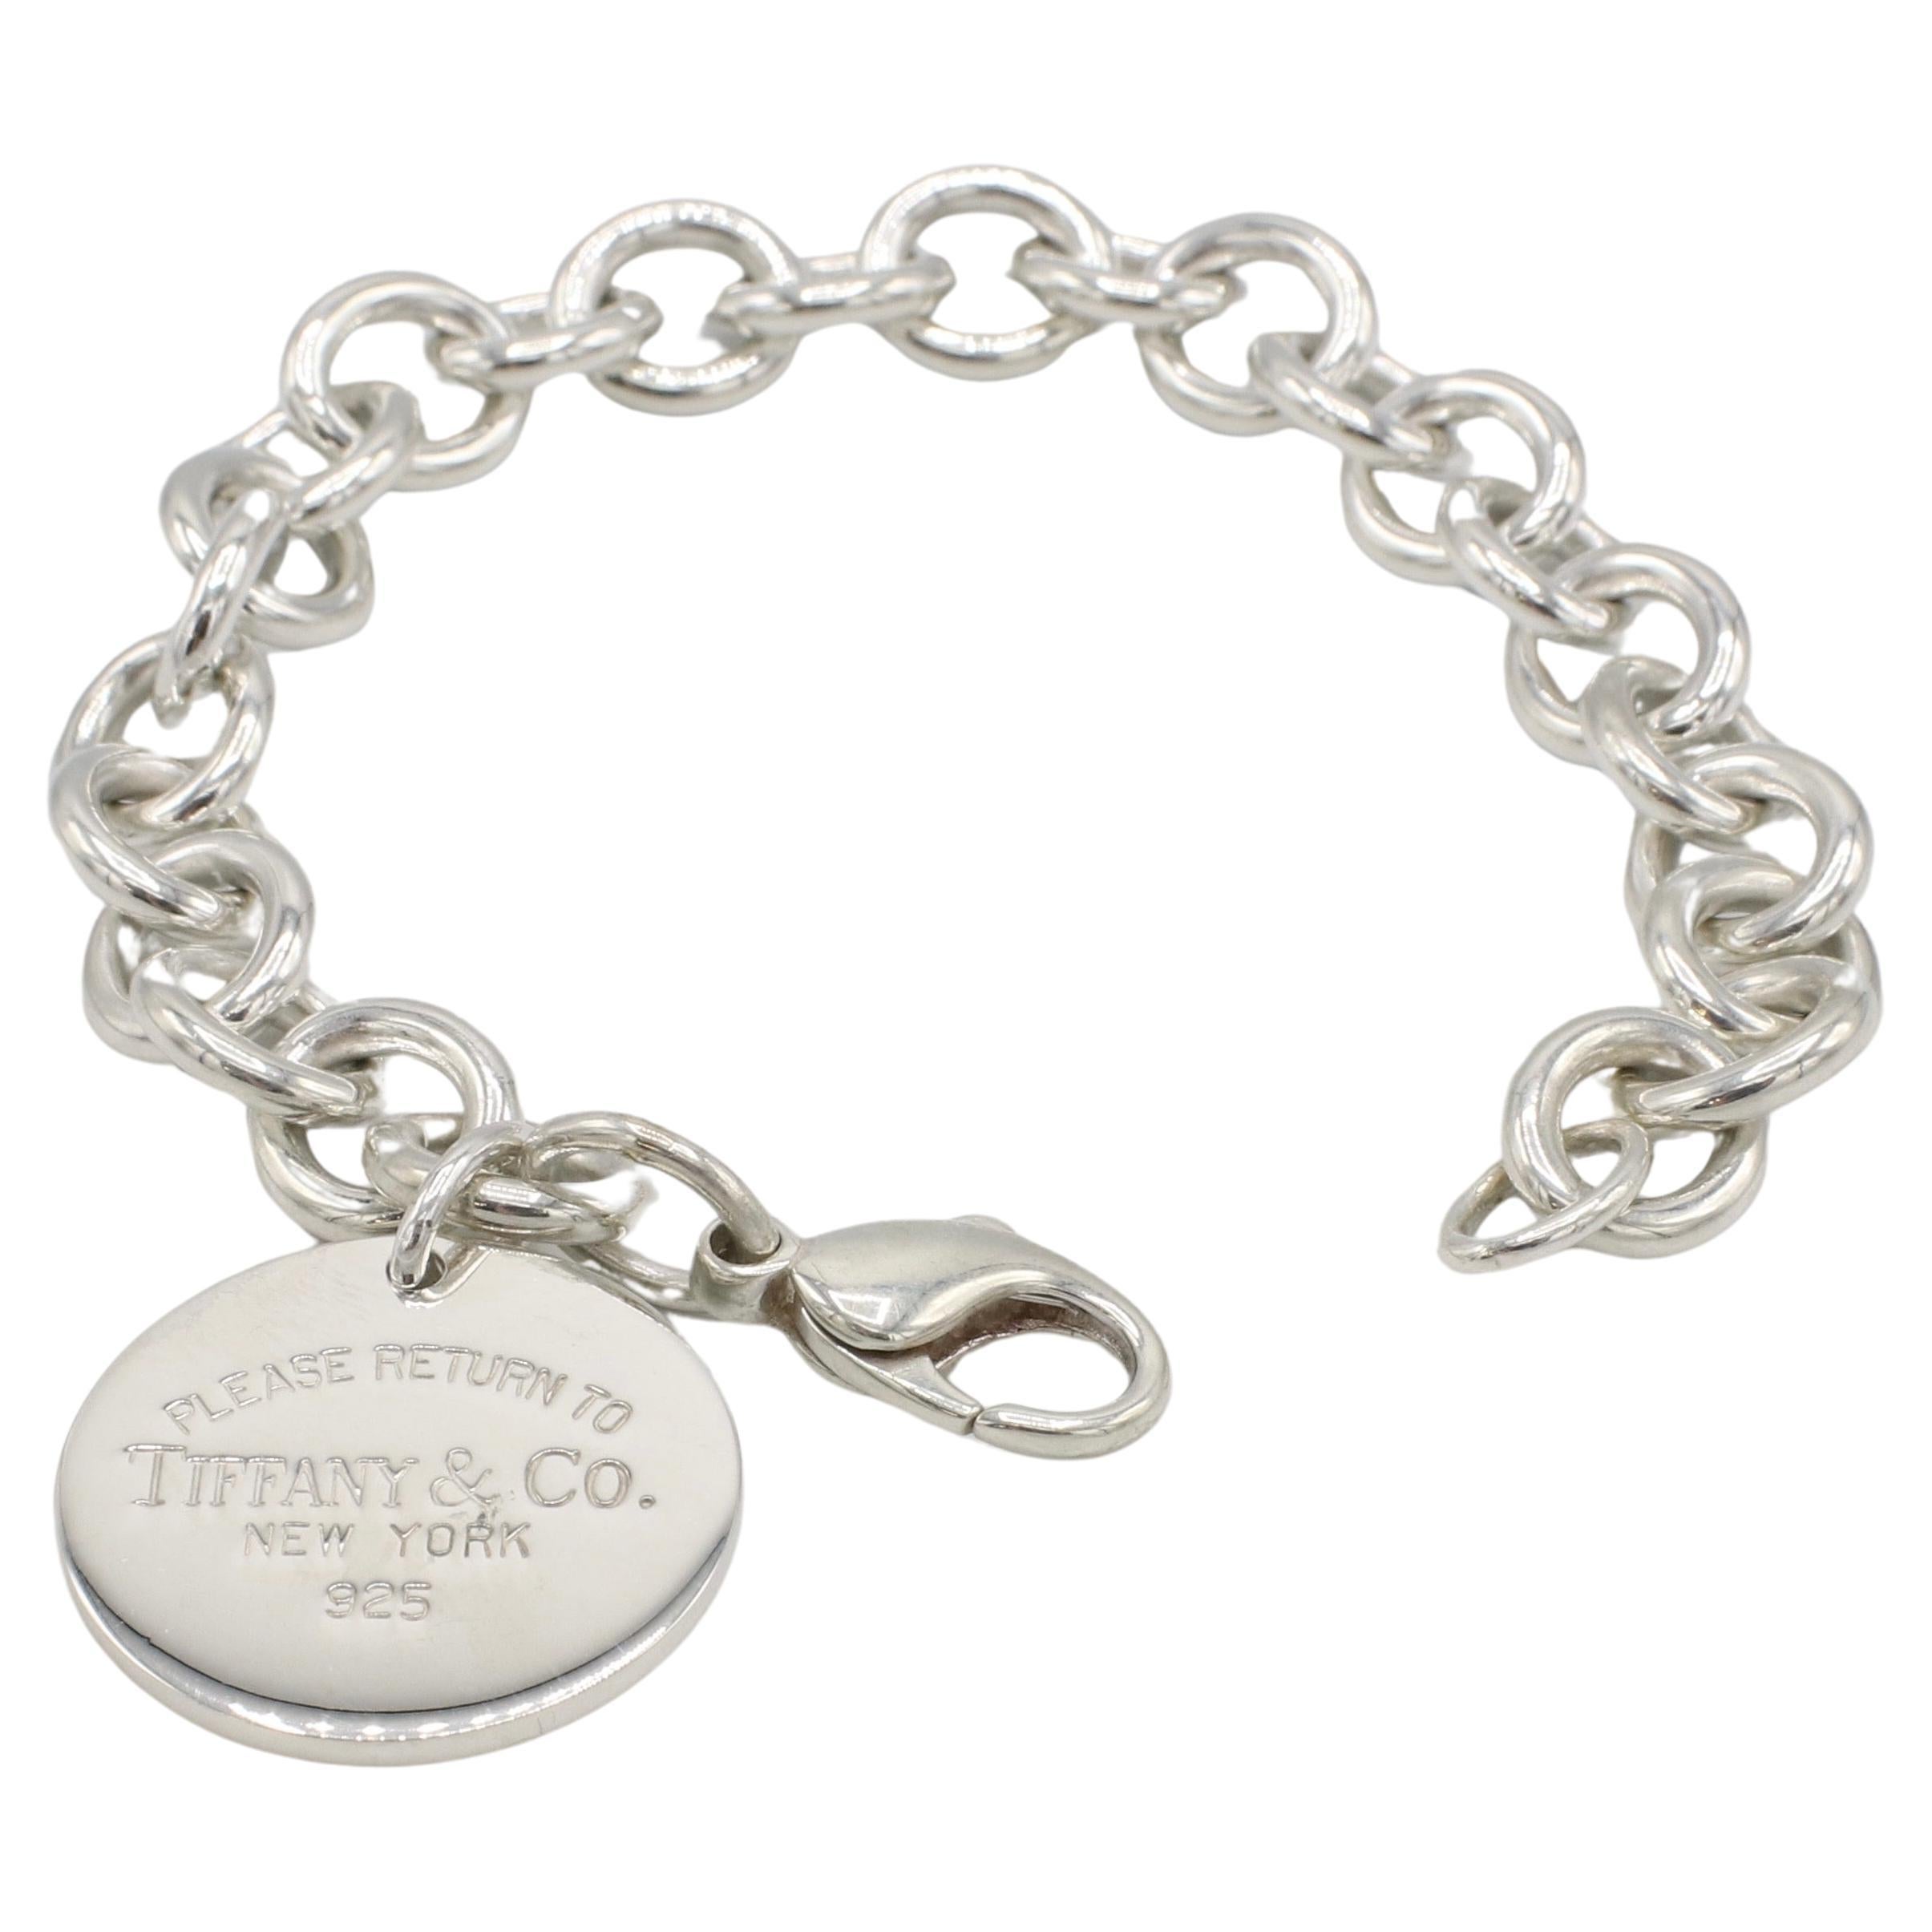 Tiffany & Co. Sterling Silver Return to Tiffany & Co. Circle Charm Link Bracelet 
Metal: Sterling silver 925
Weight: 36 grams
Charm: 24mm
Links: 10 x 11mm
Length: 7 inches 
Signed: PLEASE RETURN TO TIFFANY & CO. NEW YORK 925 
